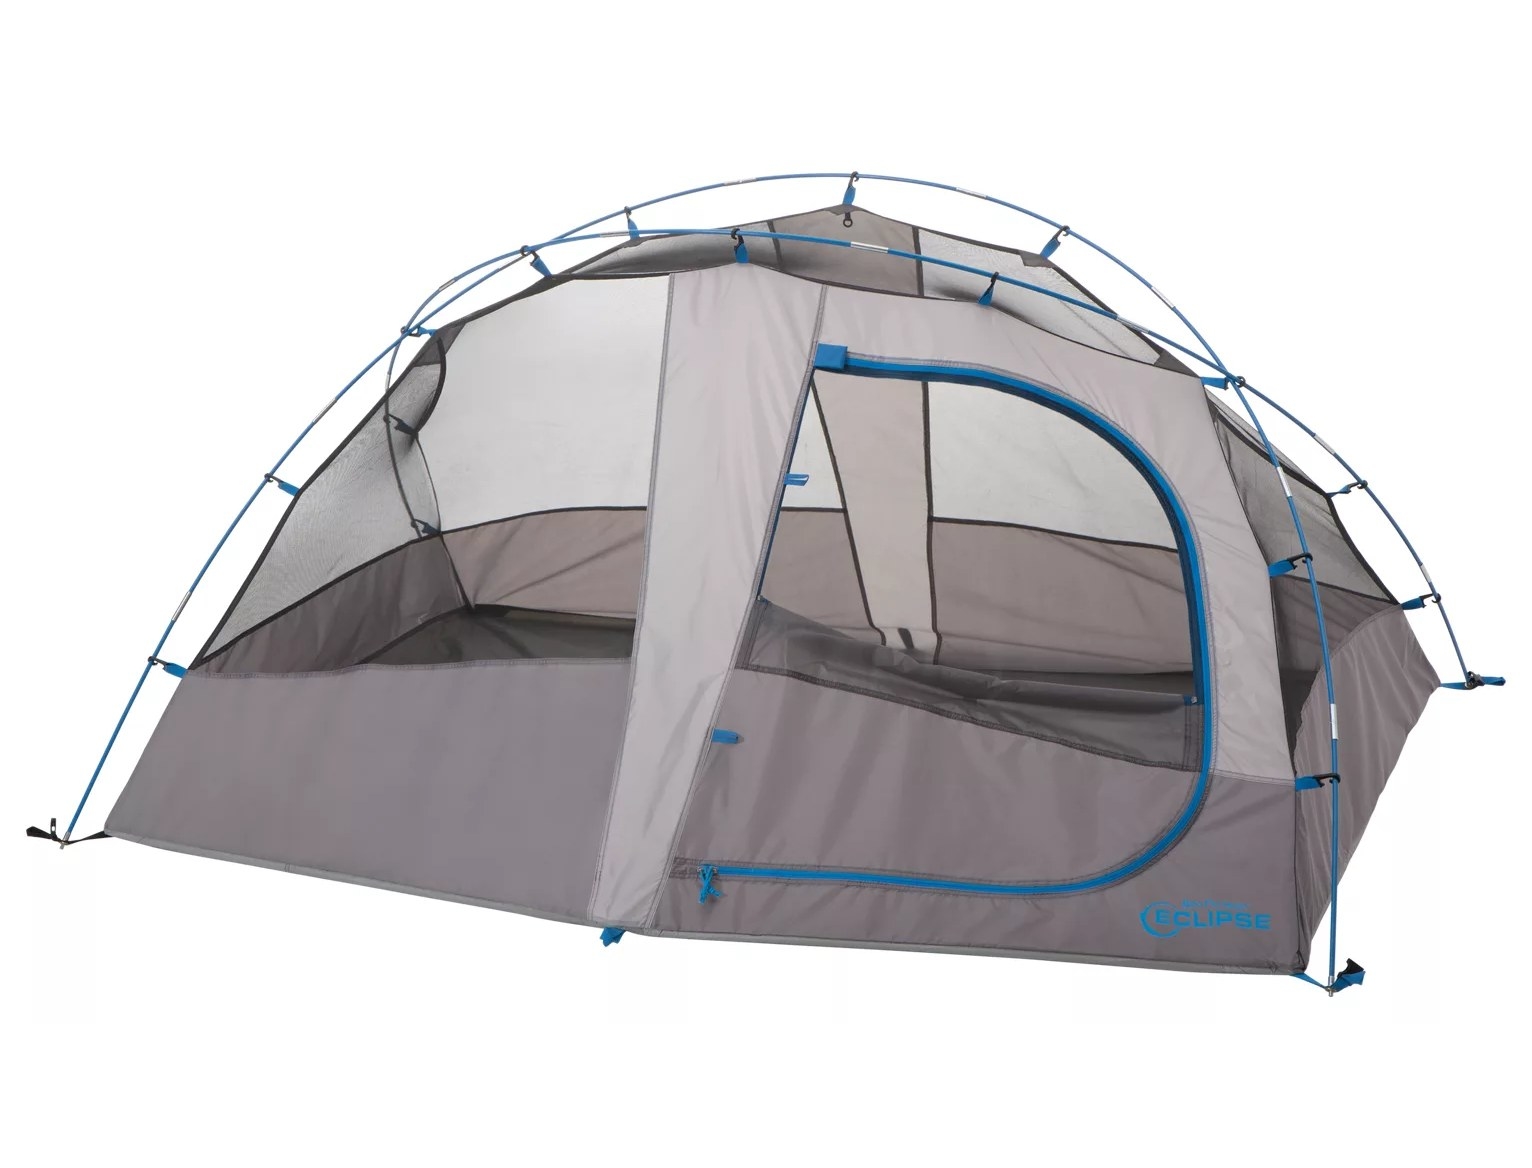 The gray tent with see through mesh windows